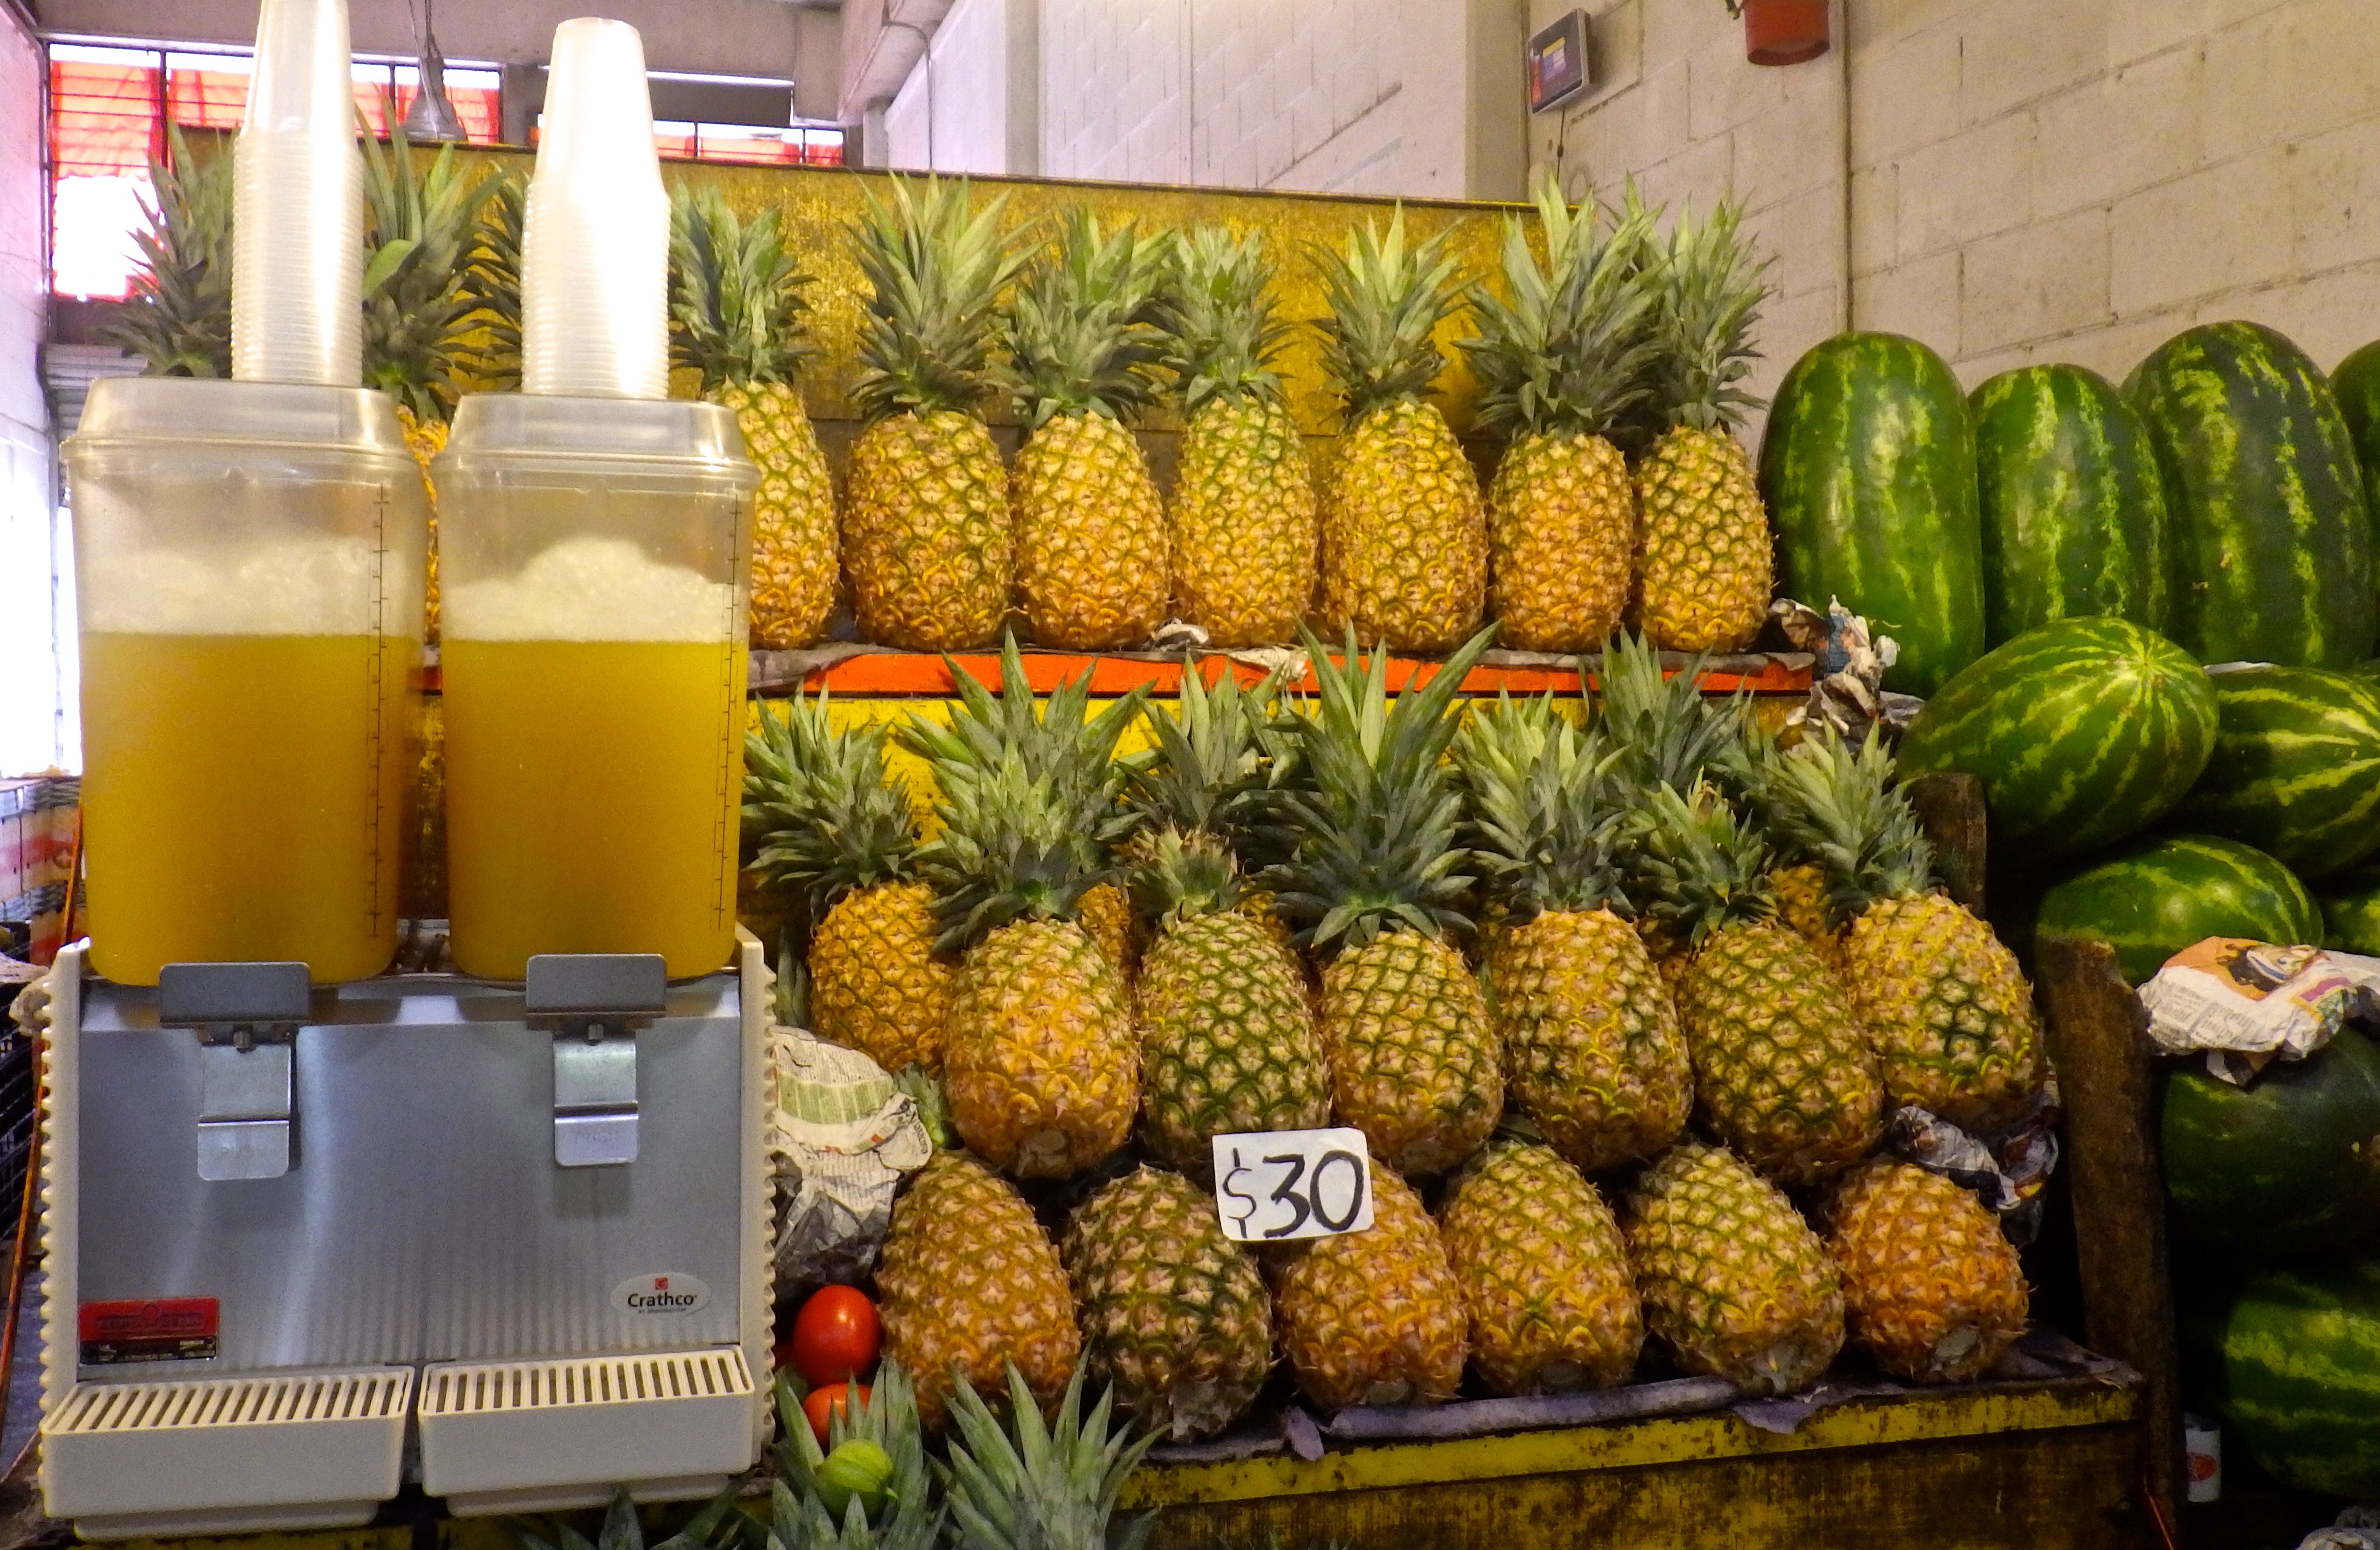 Pineapples stacked with their juice in front at Central de Abasto, the world's largest wholesale market where Mexico's cultural heritage is also on display. (image © Eva Boynton)